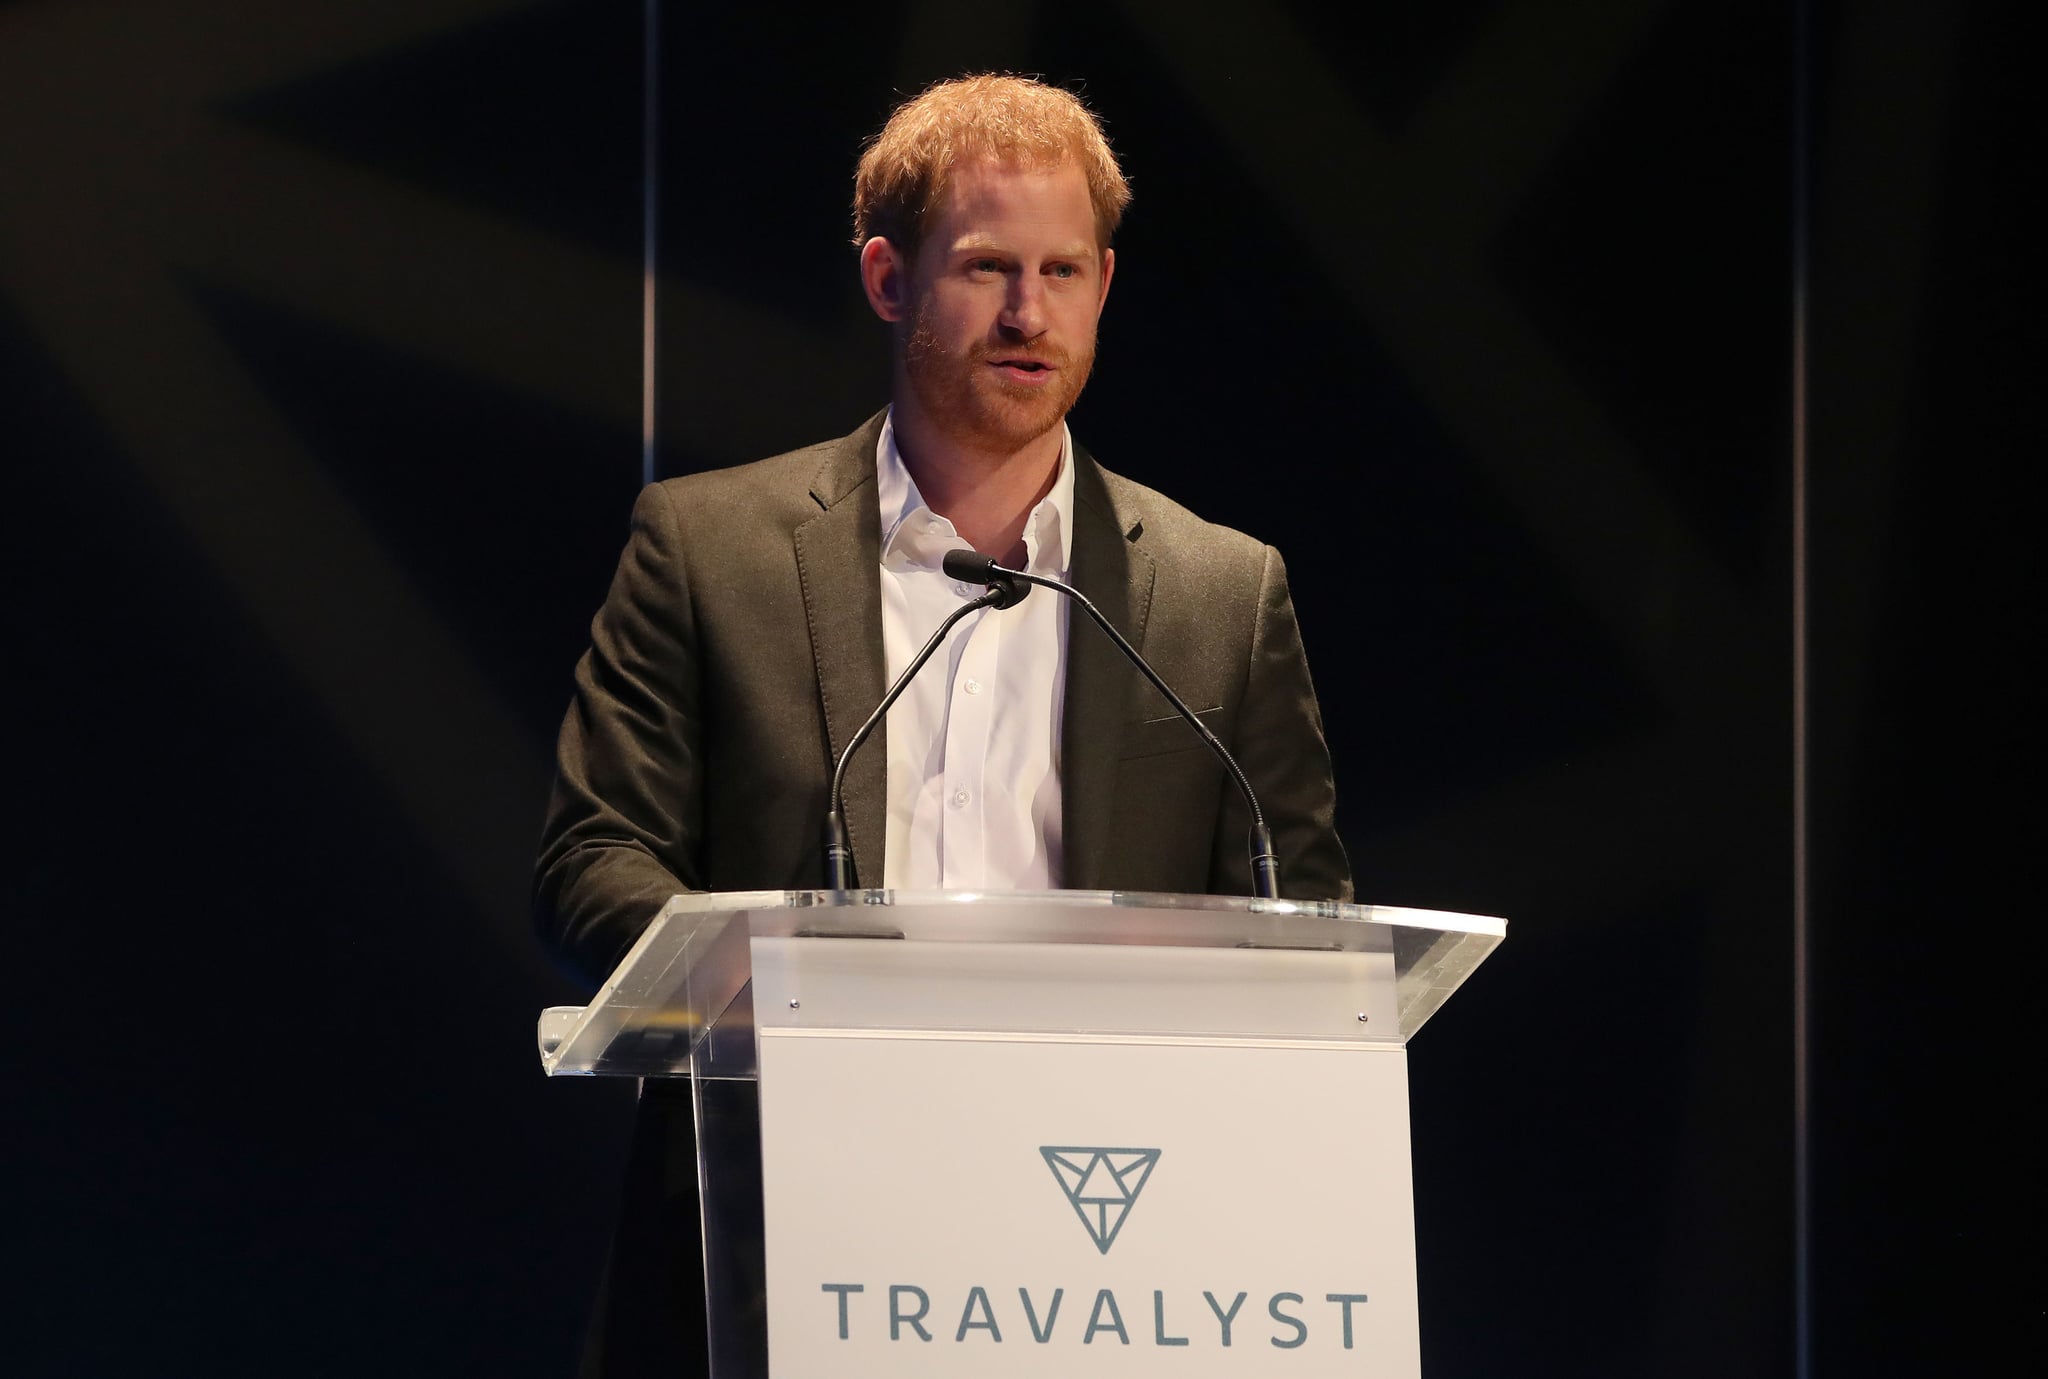 EDINBURGH, SCOTLAND - FEBRUARY 26: Prince Harry, Duke of Sussex speaks as he attends a sustainable tourism summit at the Edinburgh International Conference Centre on February 26, 2020 in Edinburgh, Scotland. (Photo by Andrew Milligan-WPA Pool/Getty Images)